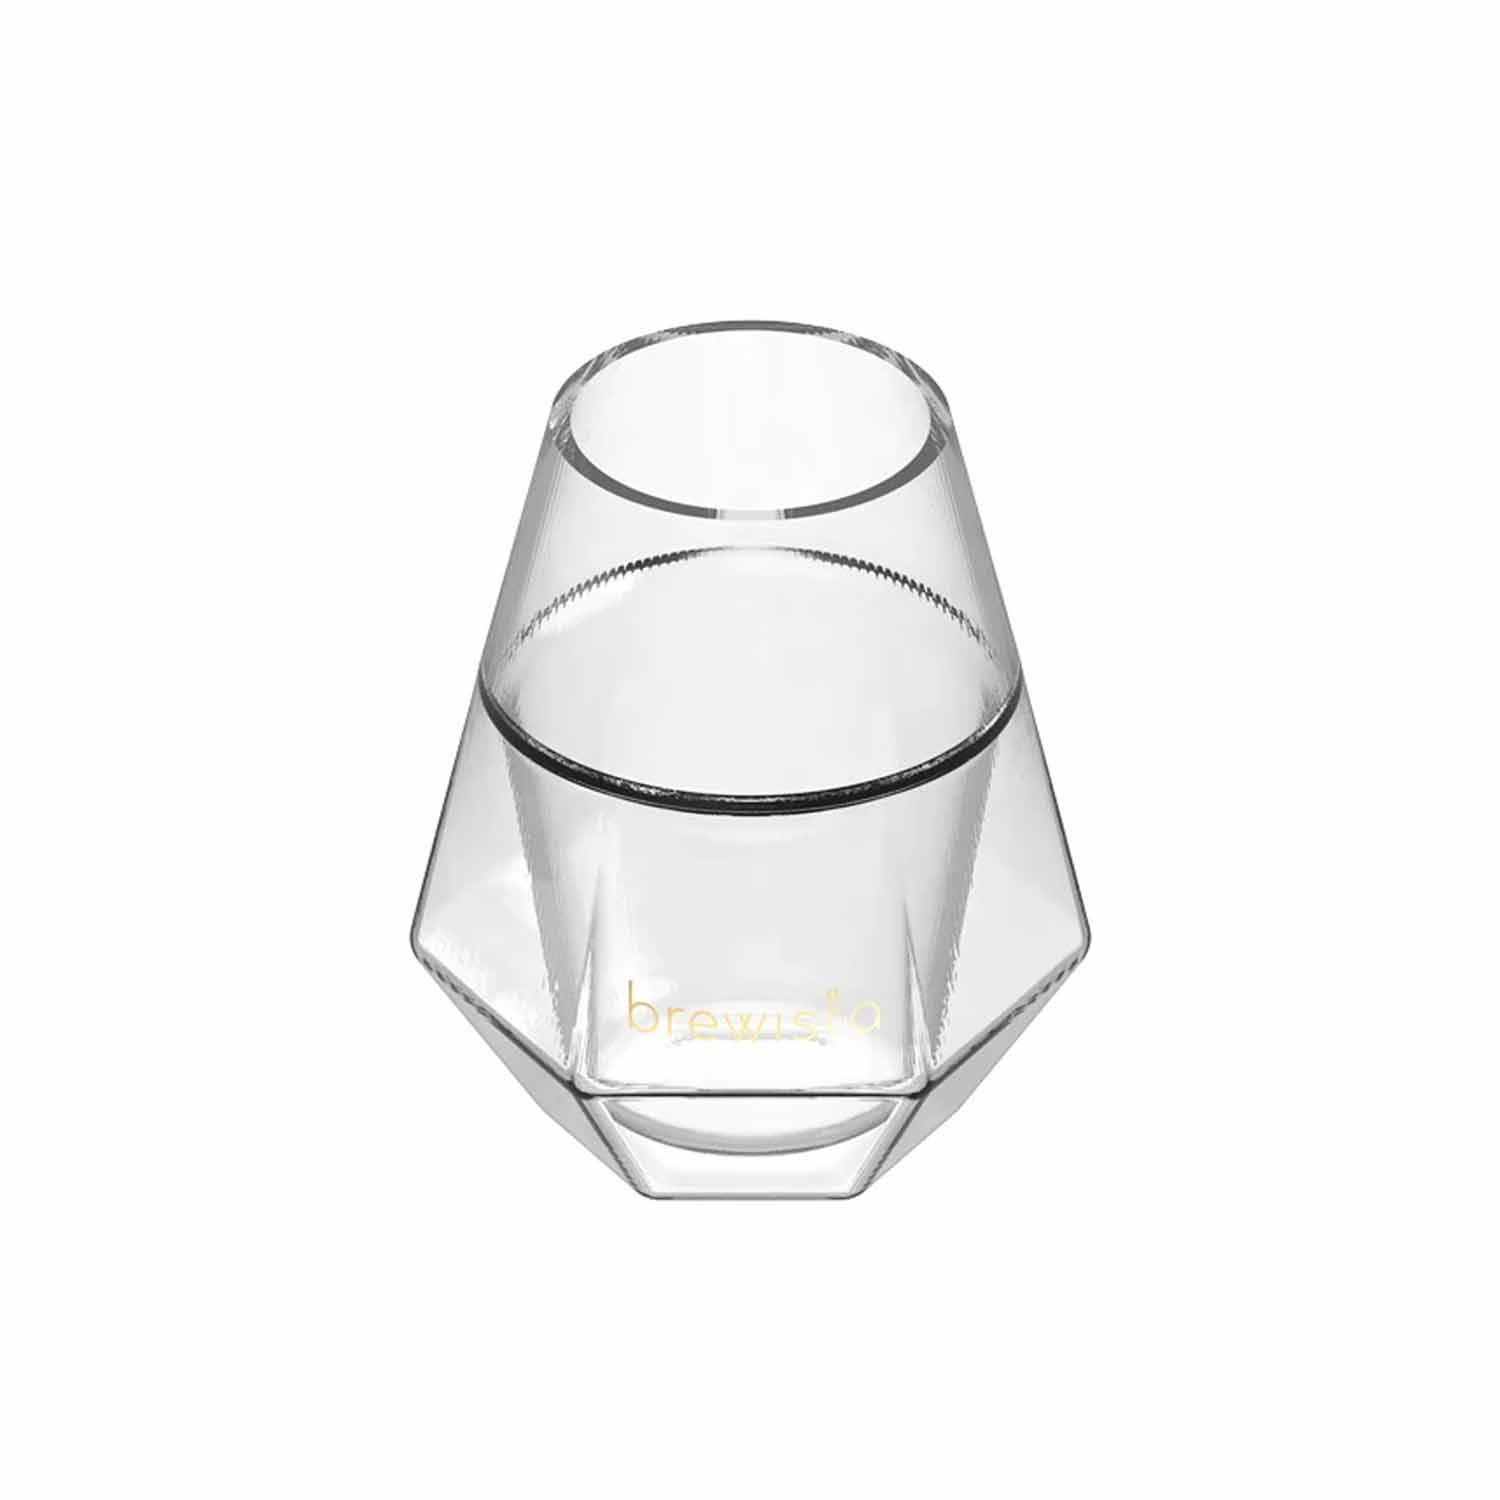  Ly Thủy Tinh 2 Lớp Brewista Double Wall Glass Aroma Cup 300ml 